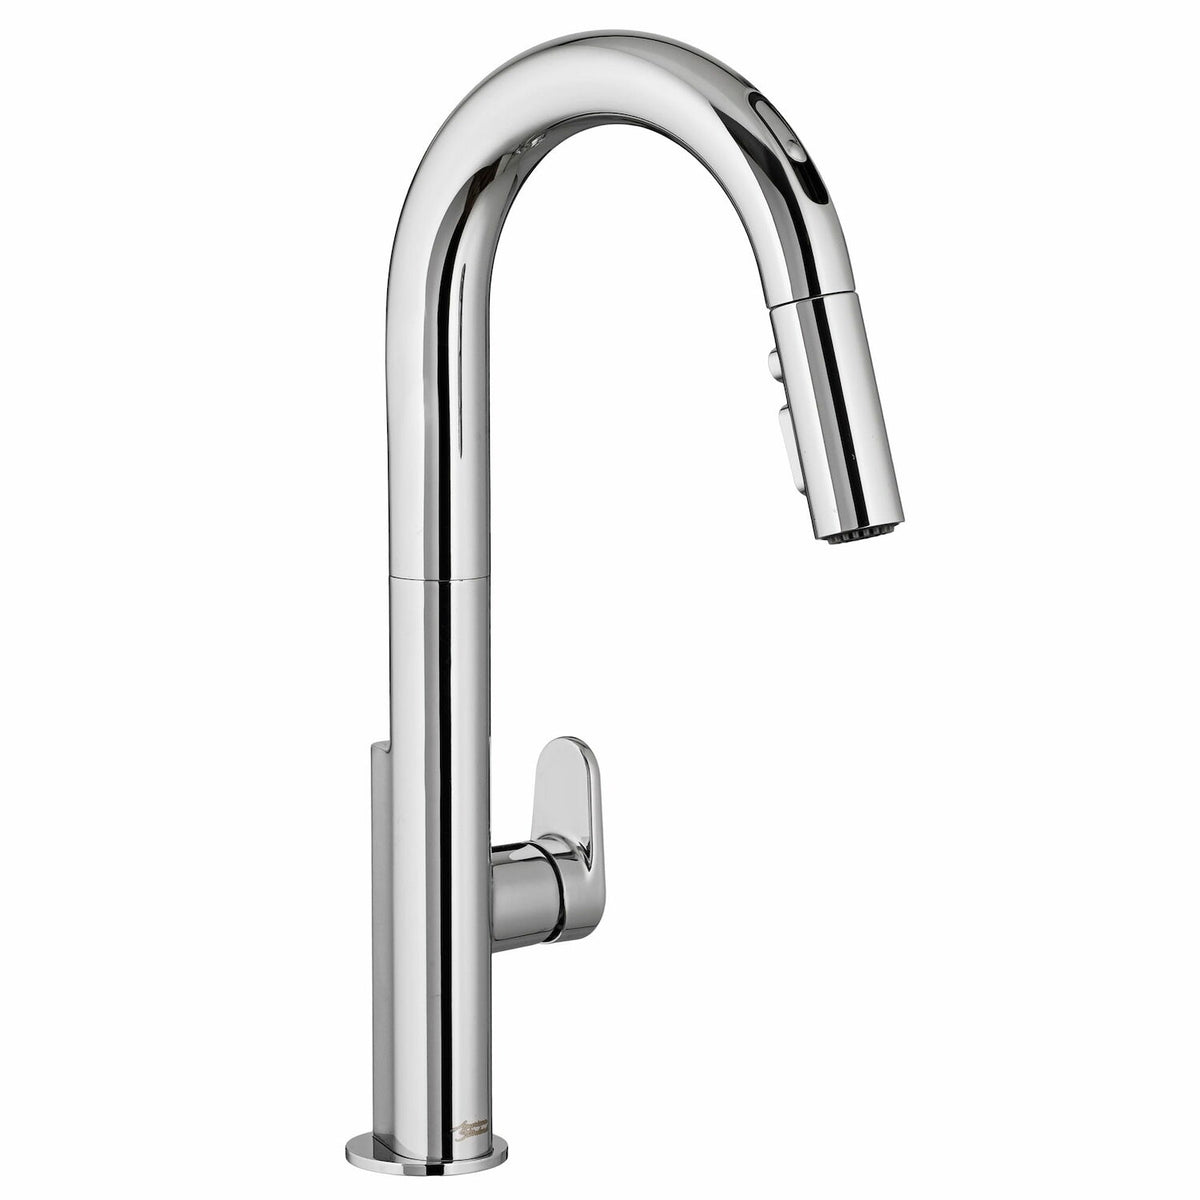 BEALE TOUCHLESS SINGLE HANDLE PULL-DOWN DUAL SPRAY KITCHEN FAUCET